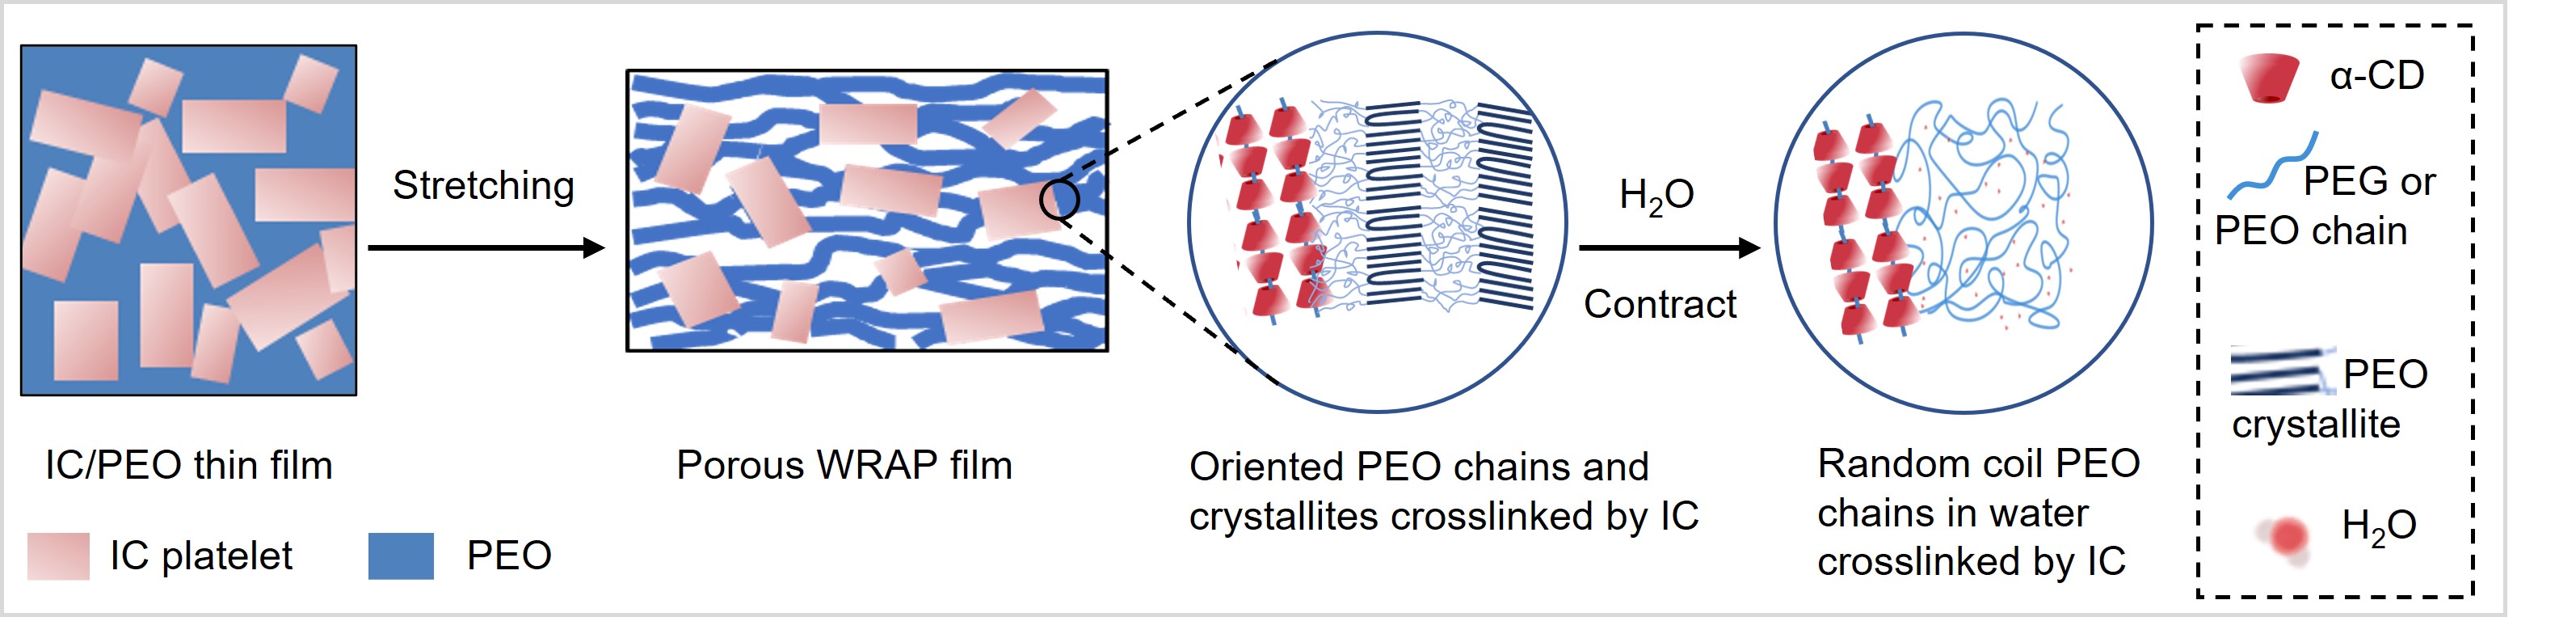 PEO crystalline structures in the material 